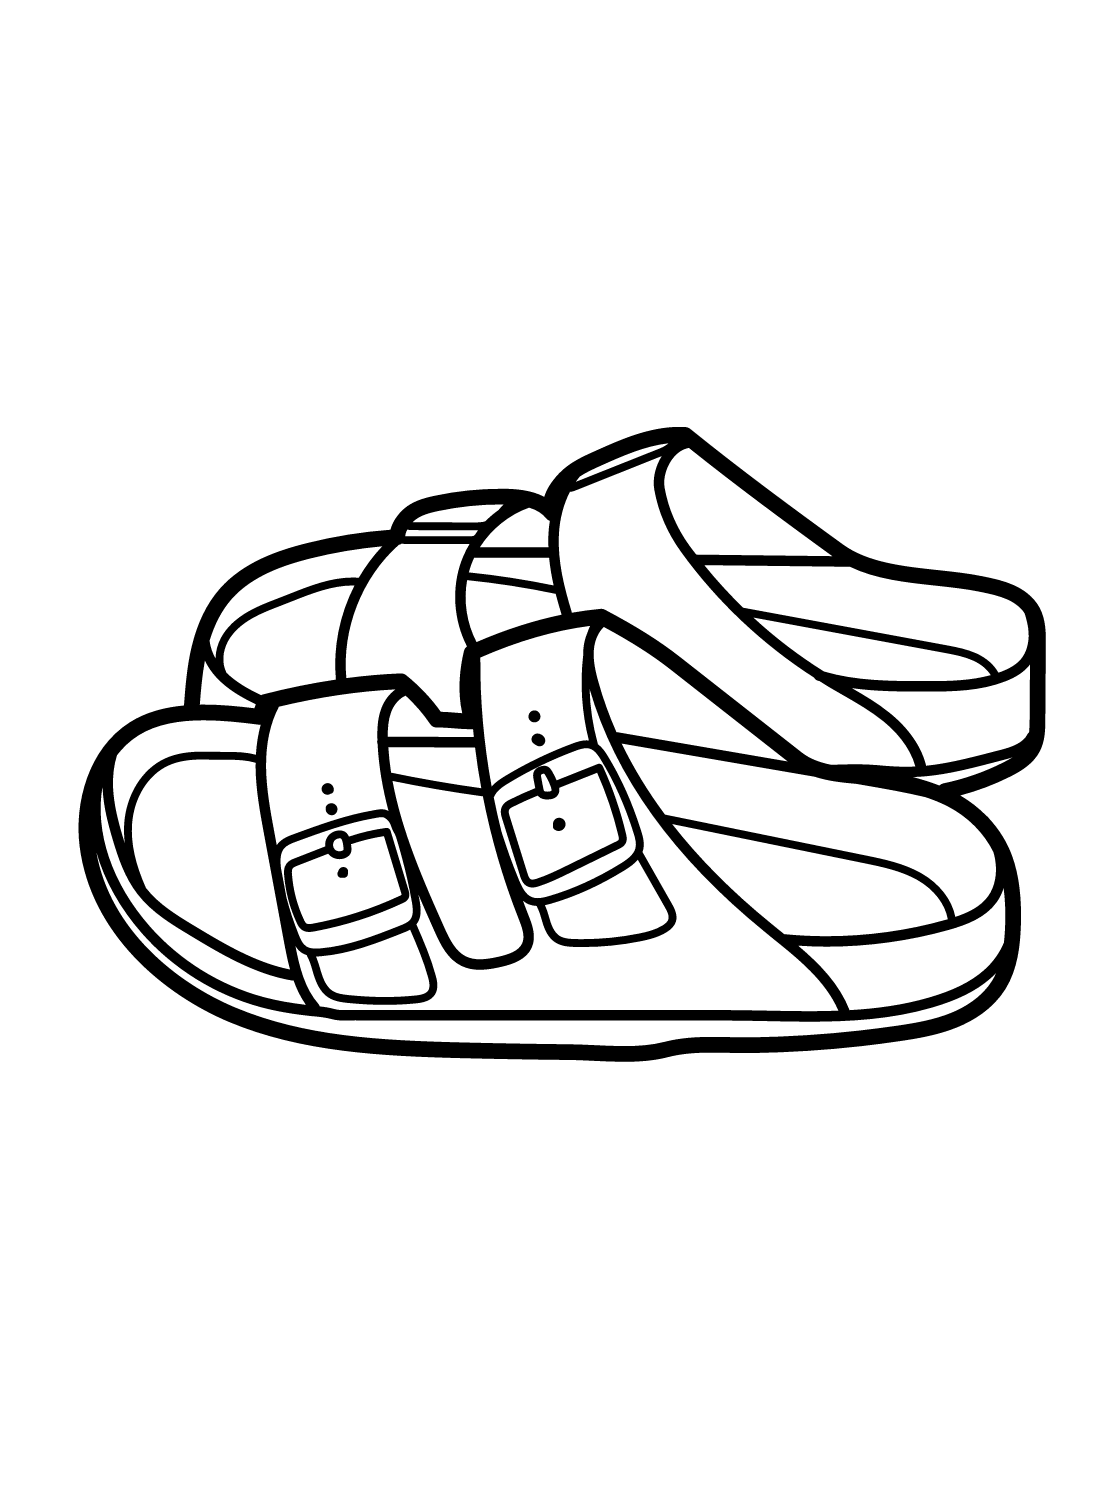 Pictures of Sandals Coloring Page